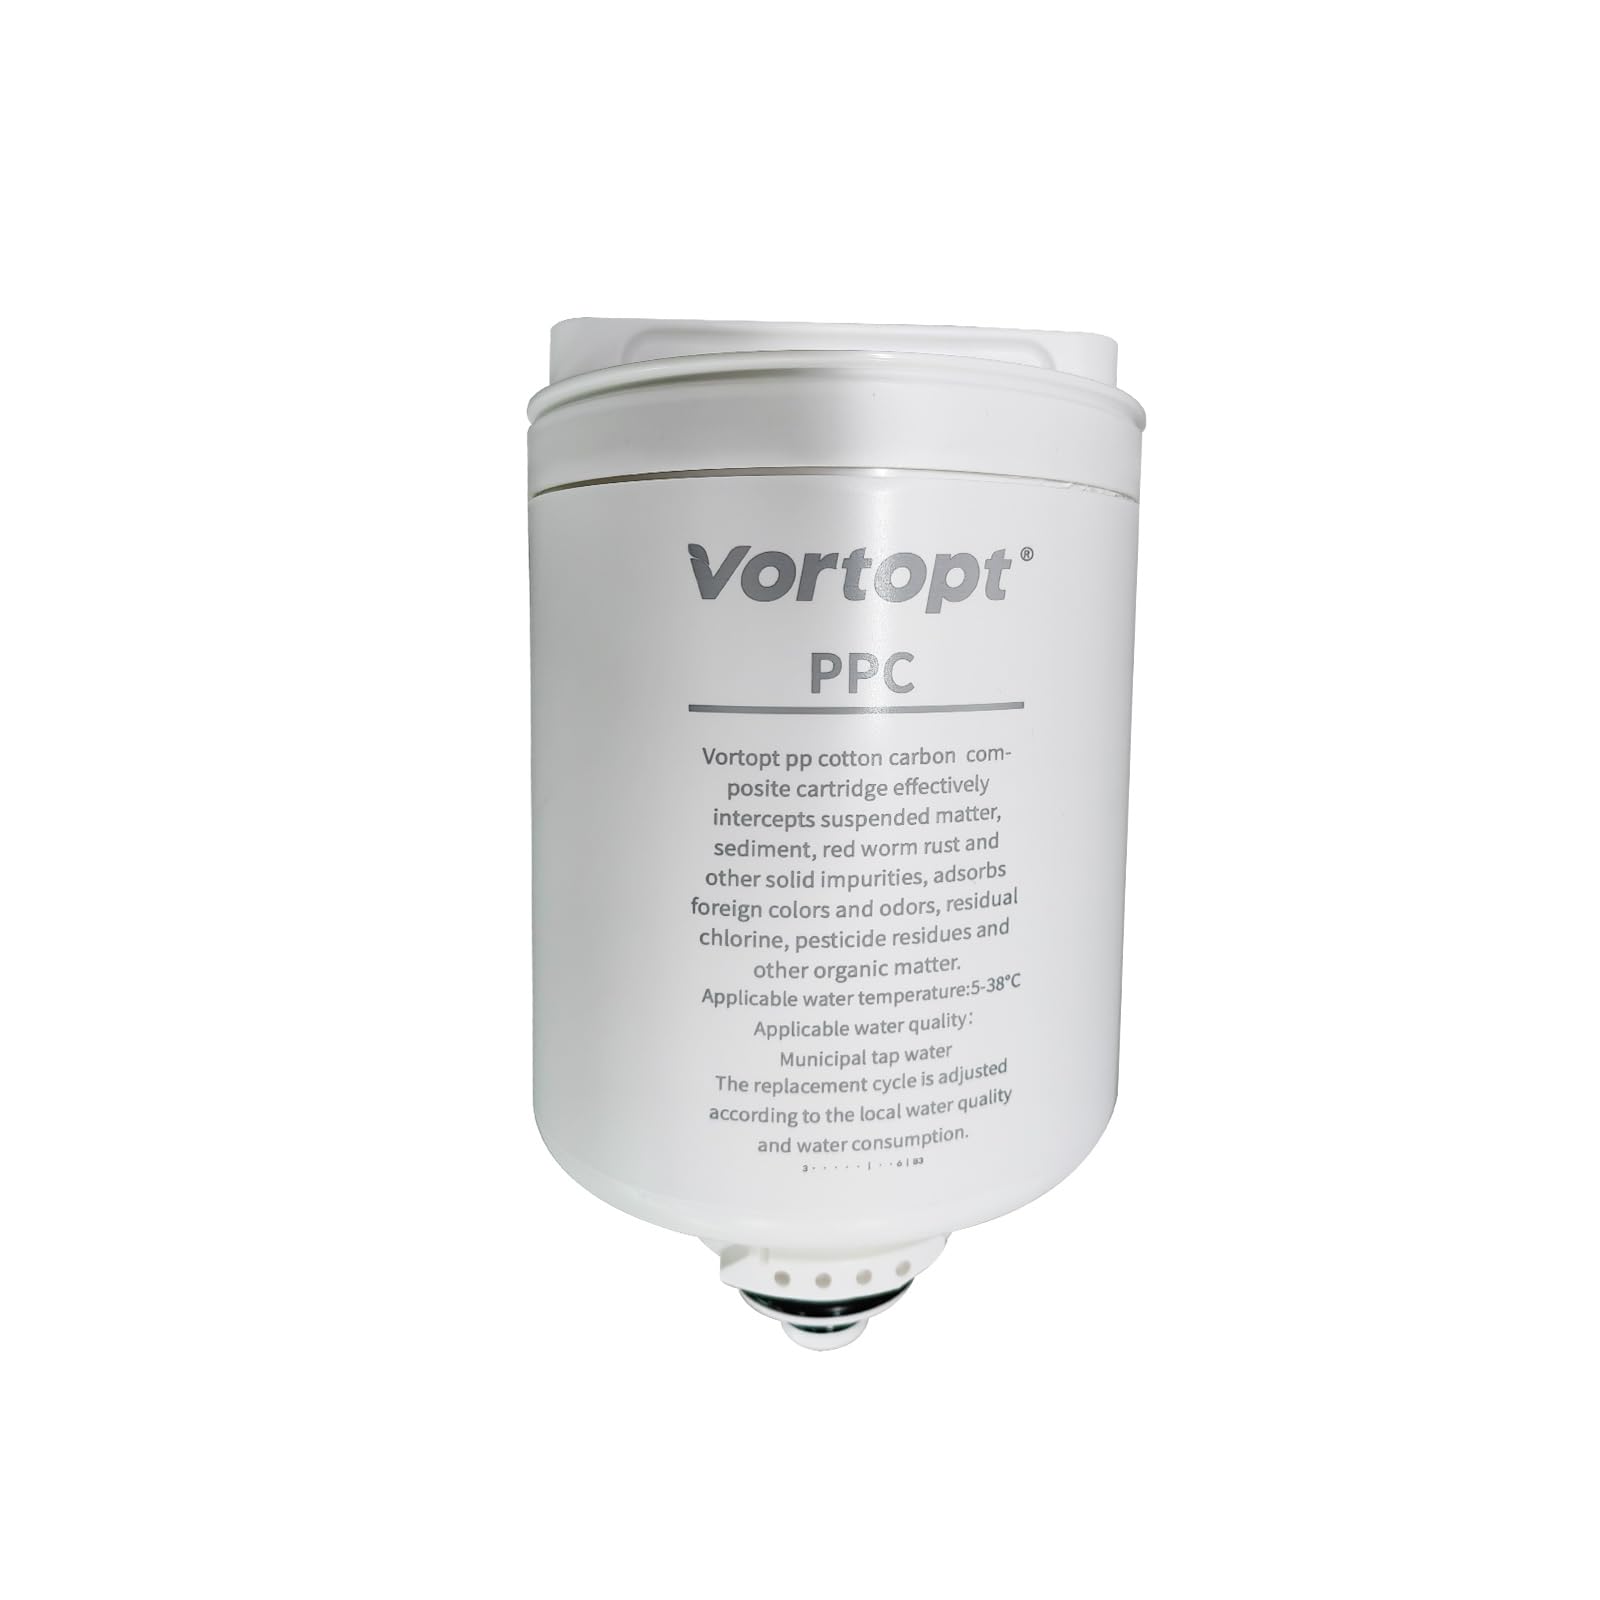 PPC Replacement Filter Compatible with DR5-1000G Under-sink Reverse Osmosis Water Filter System,Vortopt 